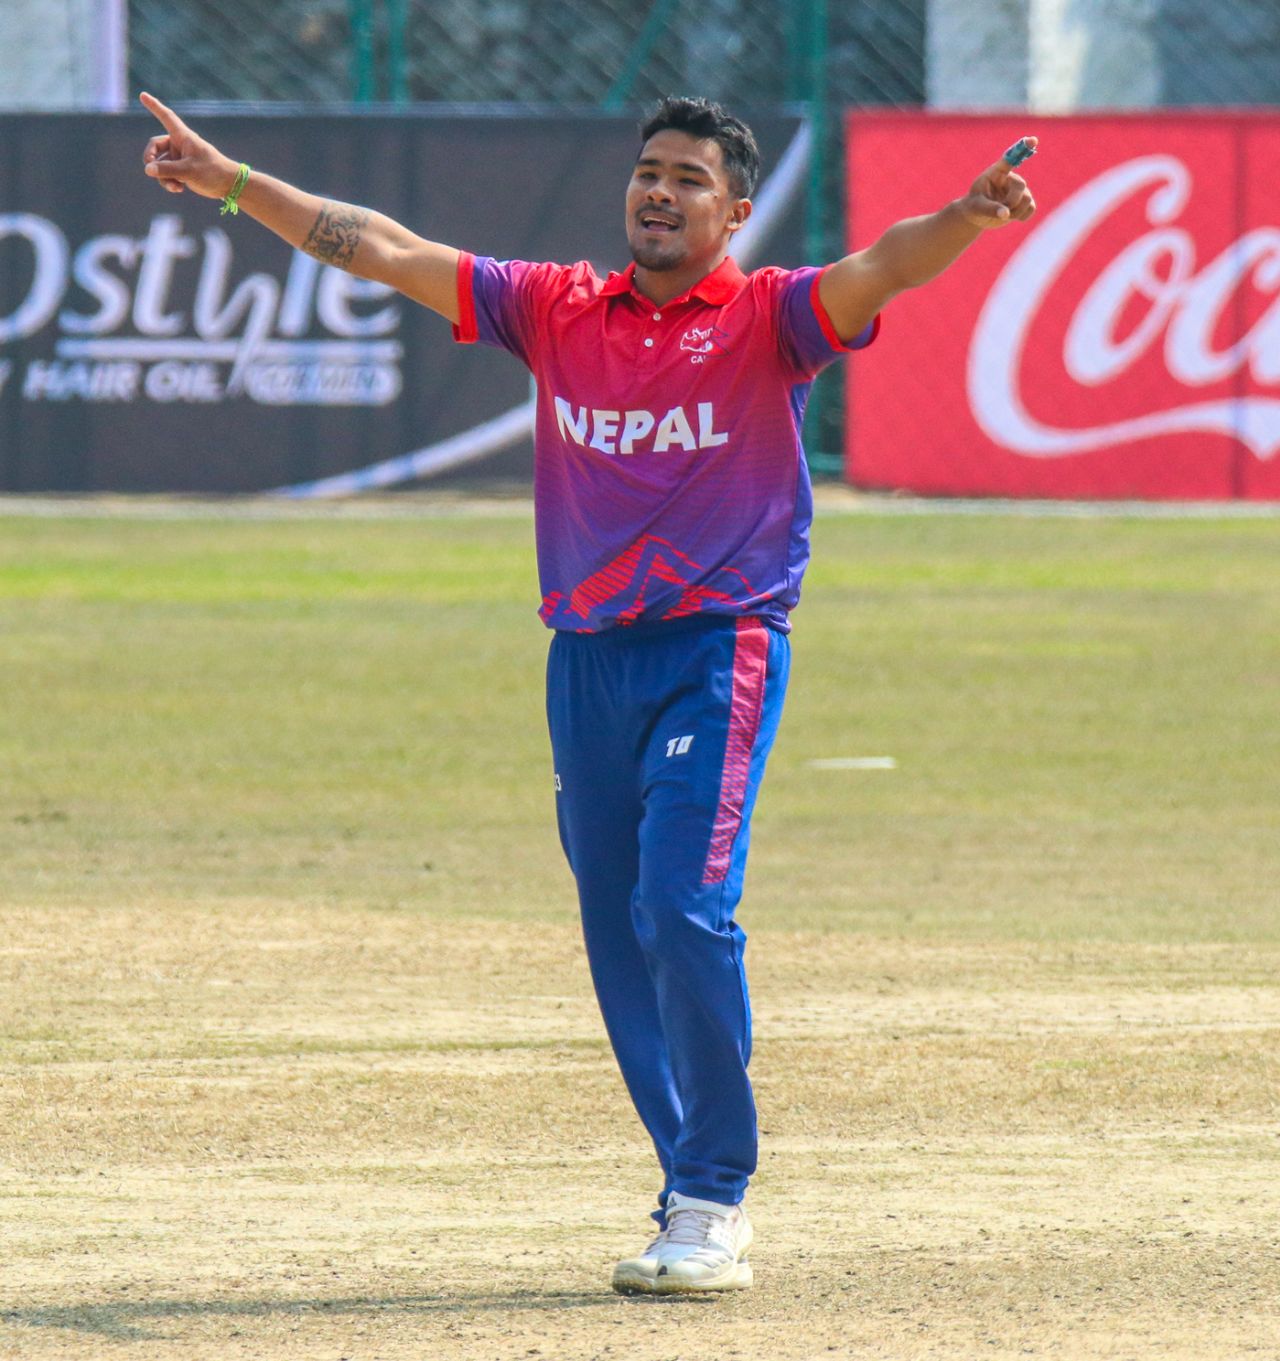 Karan KC celebrates after taking a wicket, Nepal v Oman, ICC Cricket World Cup League Two tri-series, Kirtipur, February 5, 2020